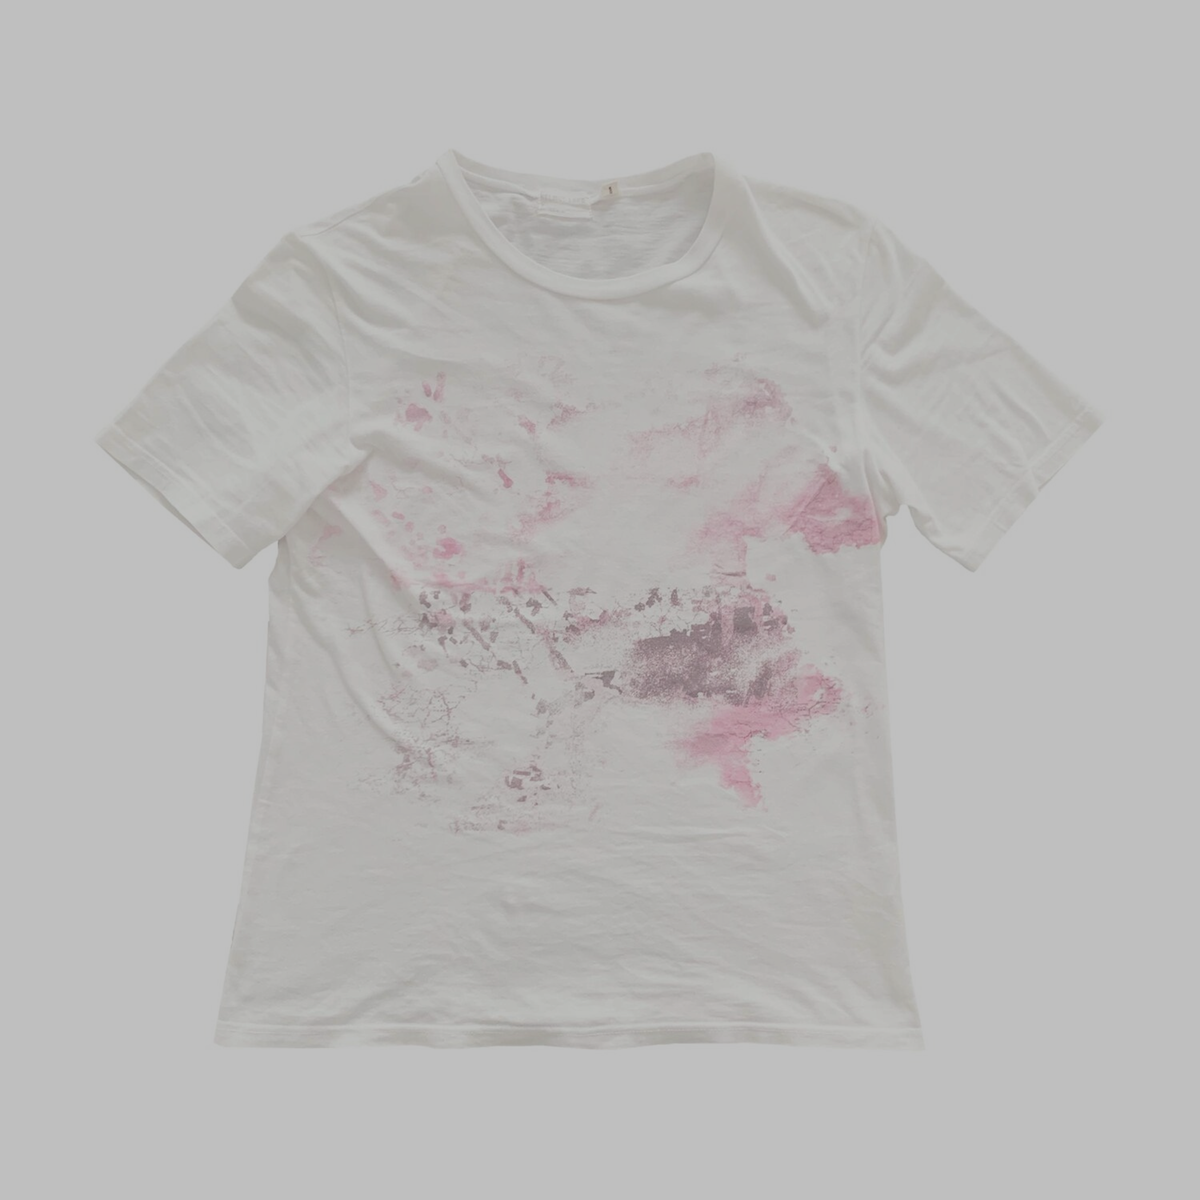 HELMUT LANG SS99 PAINTER TEE - SEA.LAM ARCHIVE